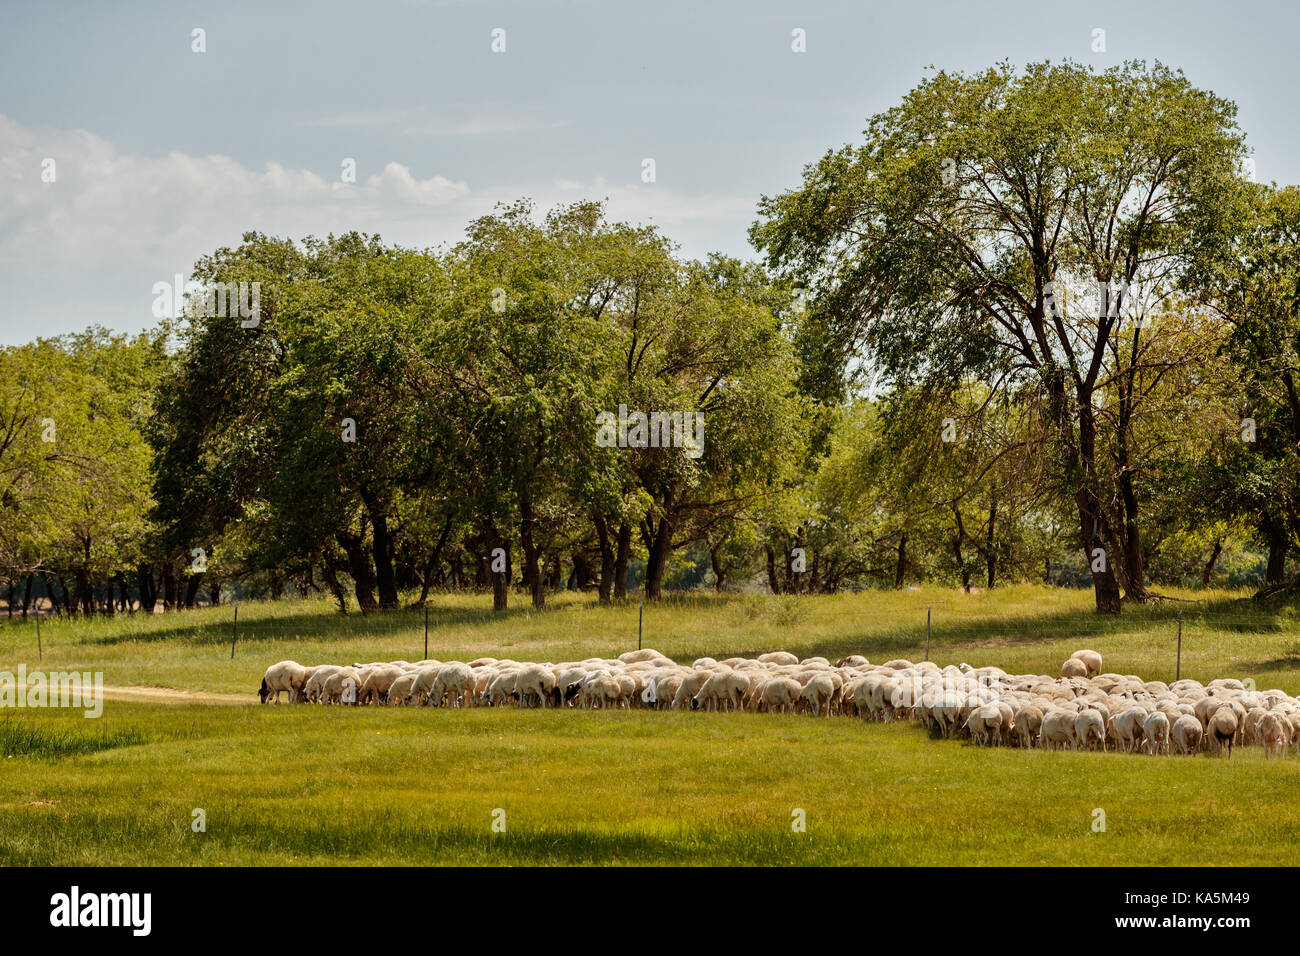 Herd of sheep in grassland of Inner Mongolia, and the yurts where the Mongolian people live in rural areas of the country Stock Photo